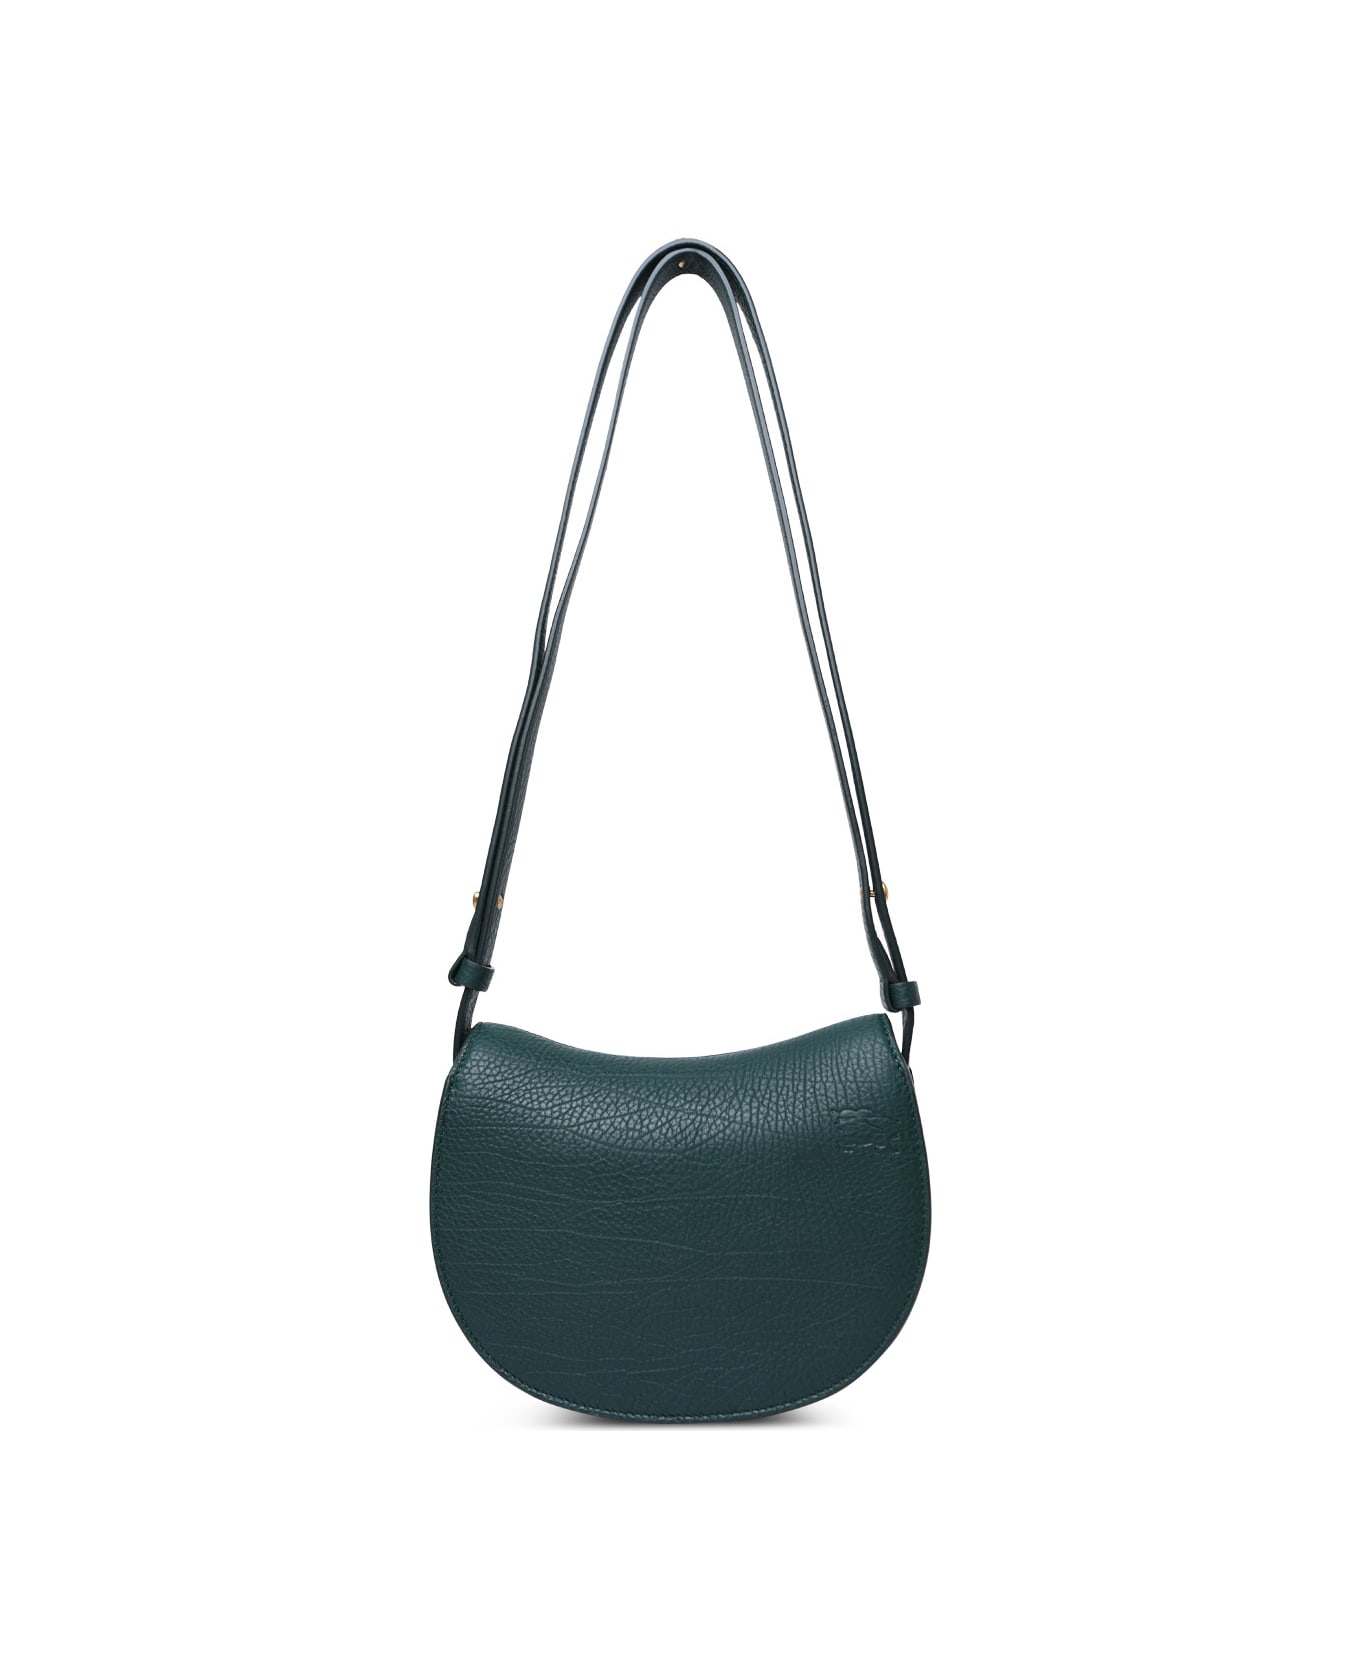 Burberry 'rocking Horse' Mini Bag In Green Leather - Green